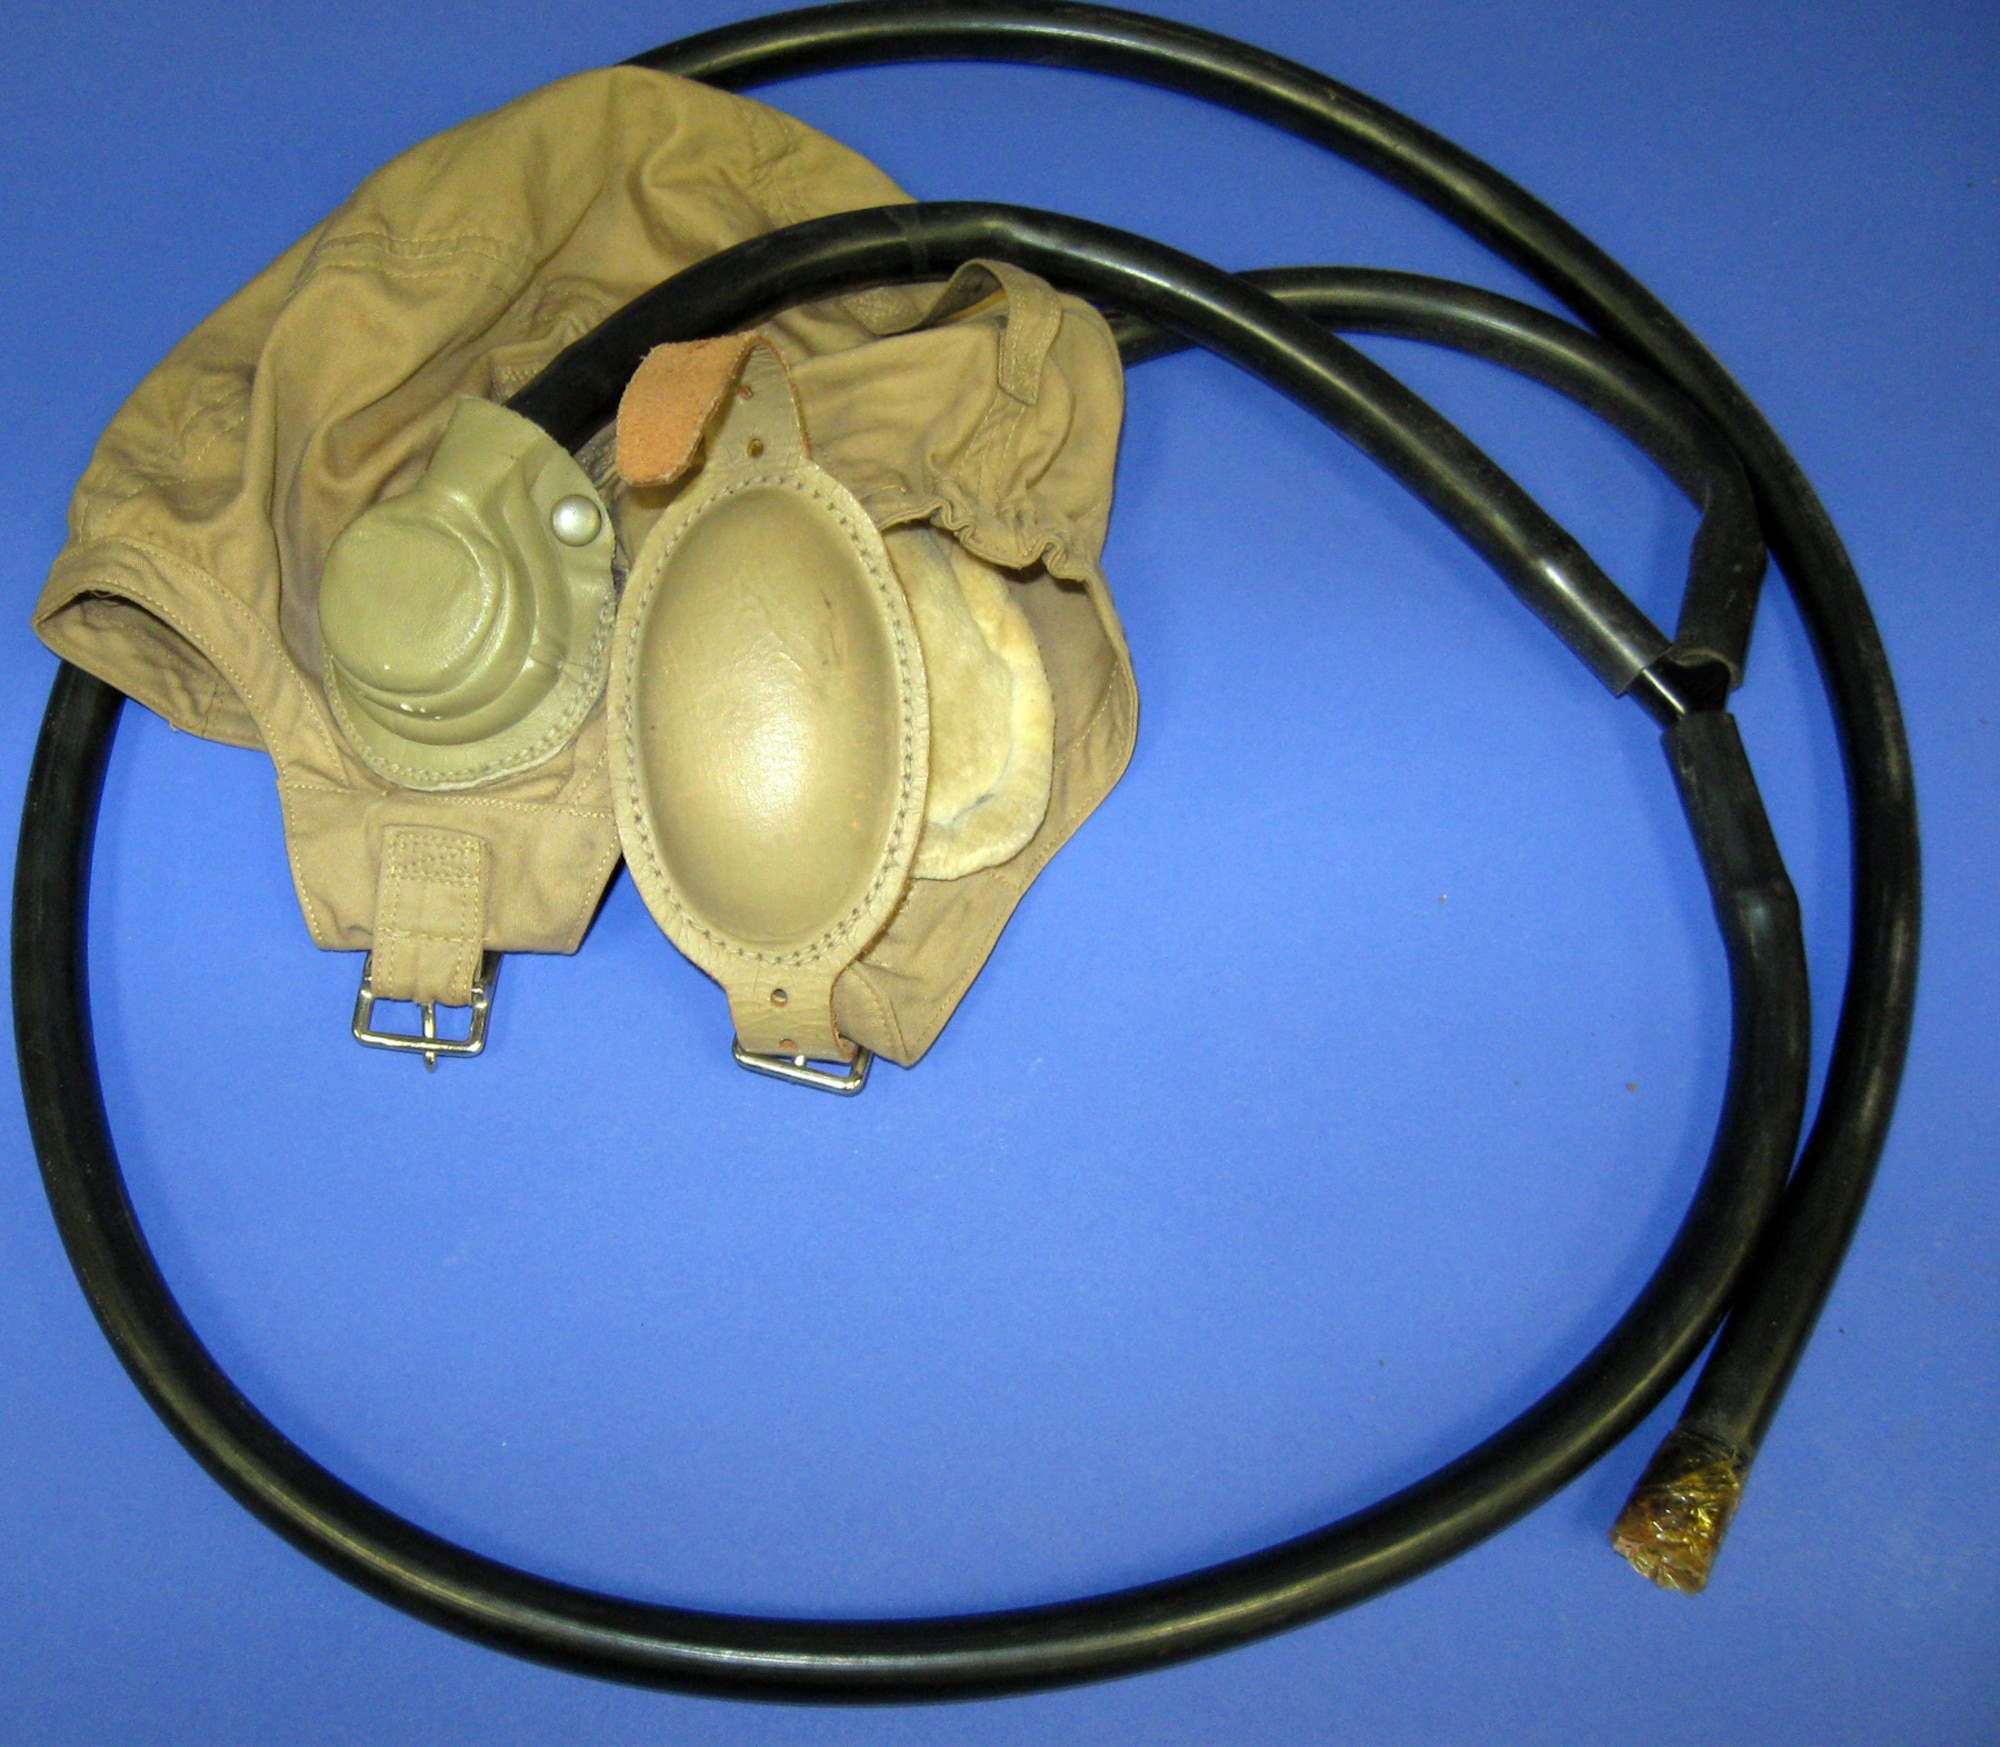 A Gosport Tube was a voice tube used by flight instructors in the early days of military aviation to give instructions and directions to their students. It was invented by flying instructor Robert Raymond Smith-Barry at the School of Special Flying he opened at Gosport in 1917. (U.S. Air Force photo)